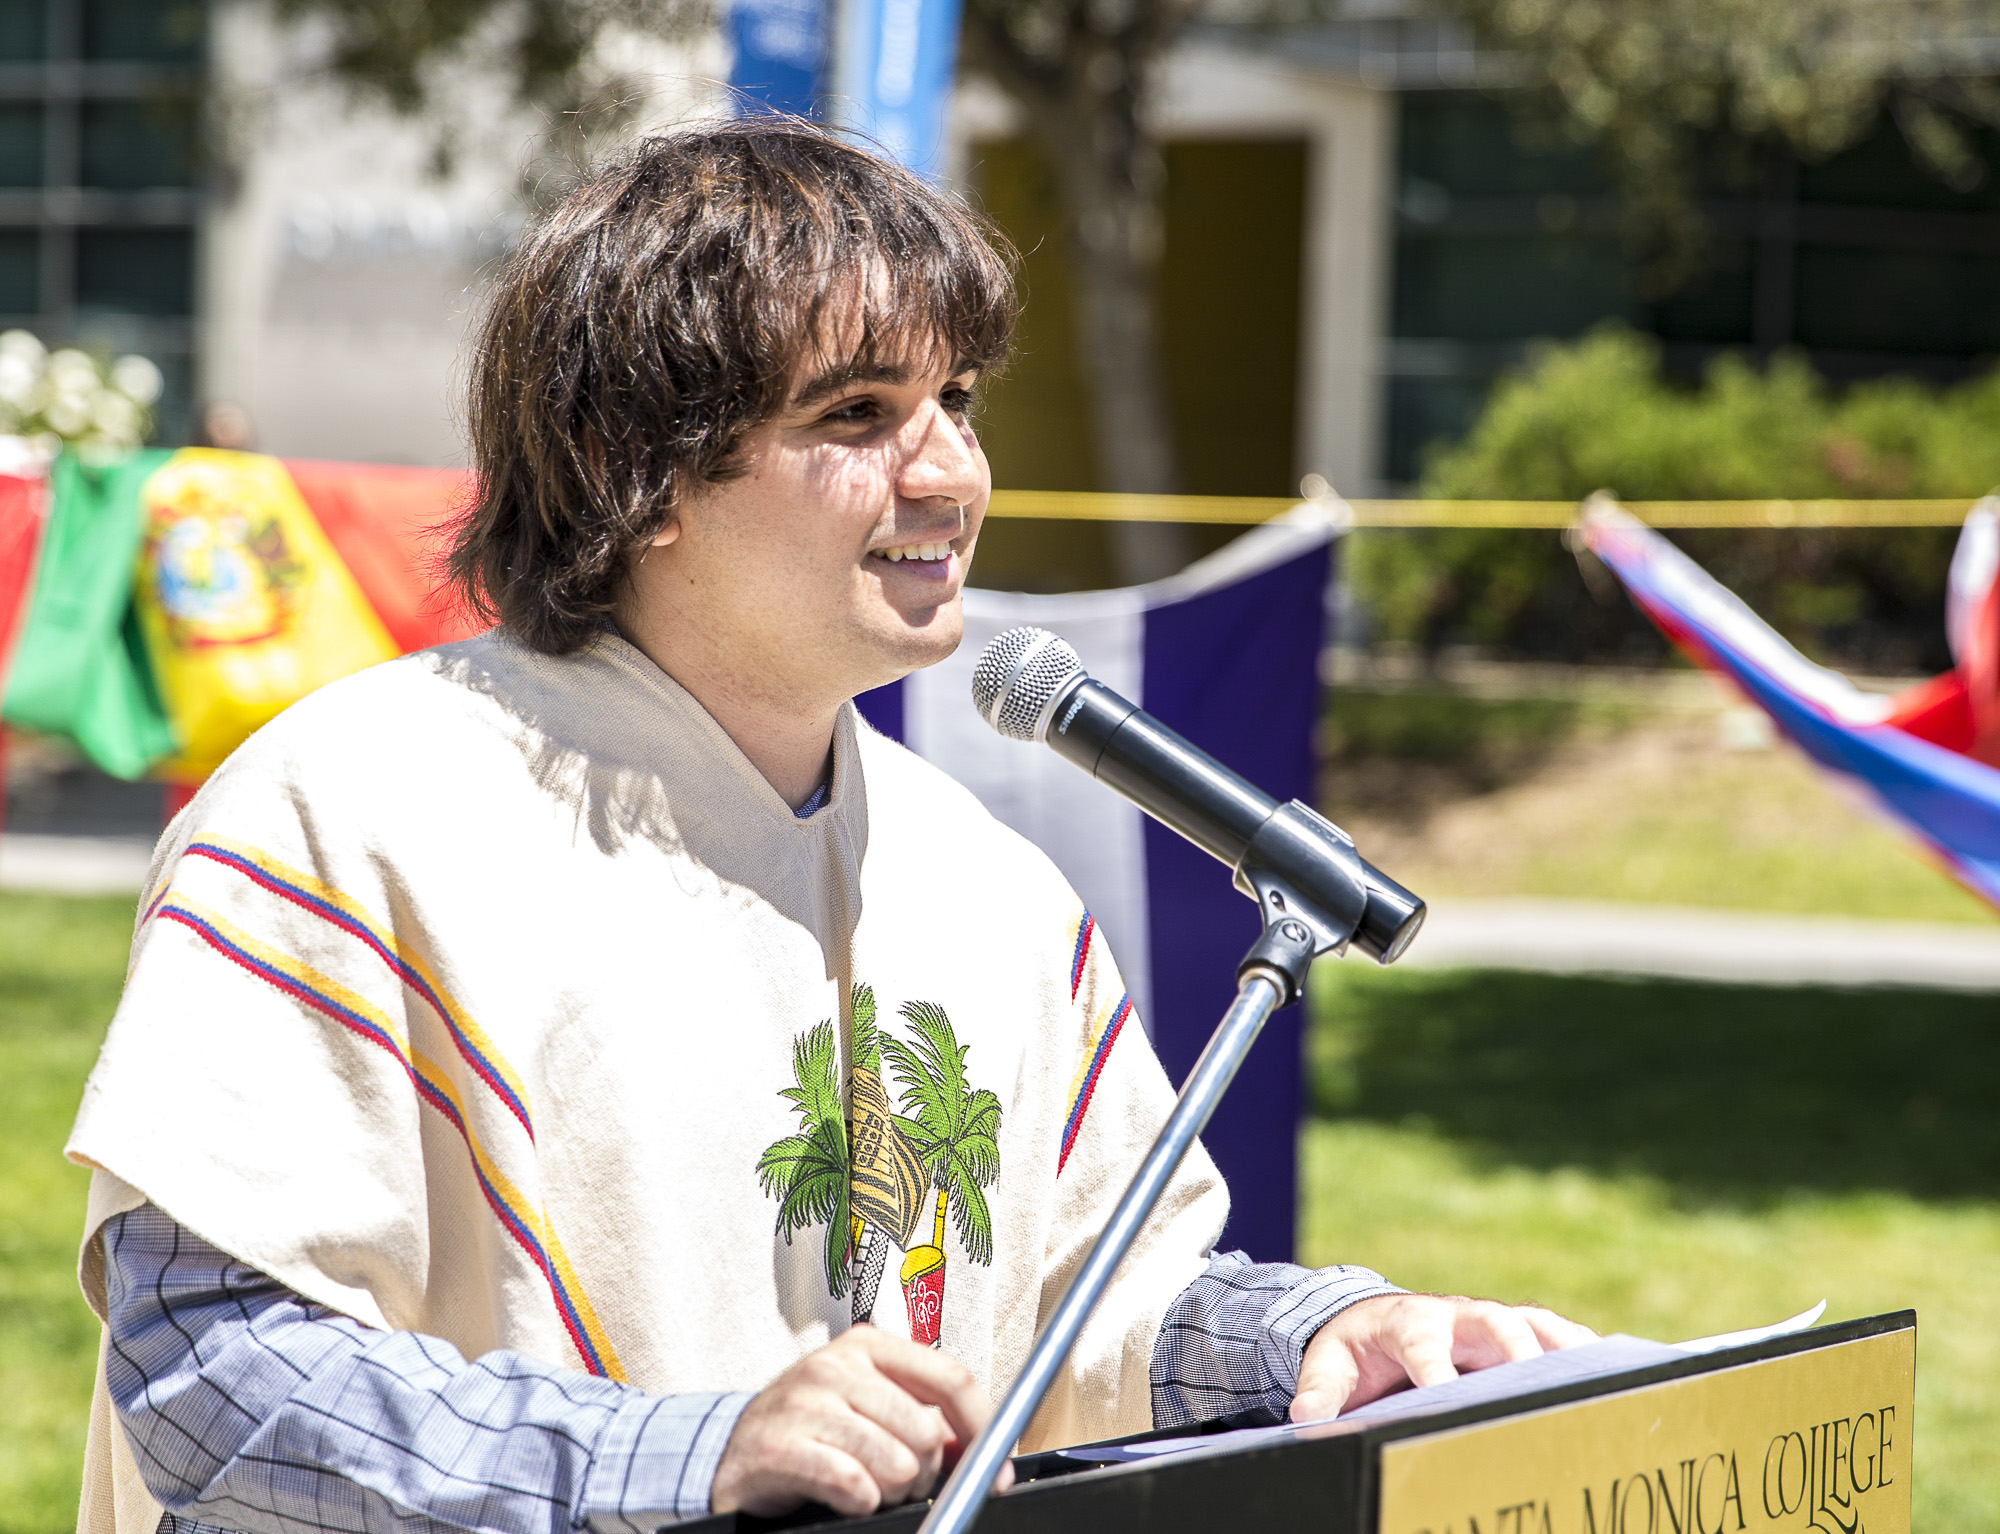  Santa Monica College (SMC) student and President of the club “Adelante” Joshua Barsky speaks to those in attendance on the importance of Cinco de Mayo and educating those that don’t understand its significance during the Santa Monica College Cinco D